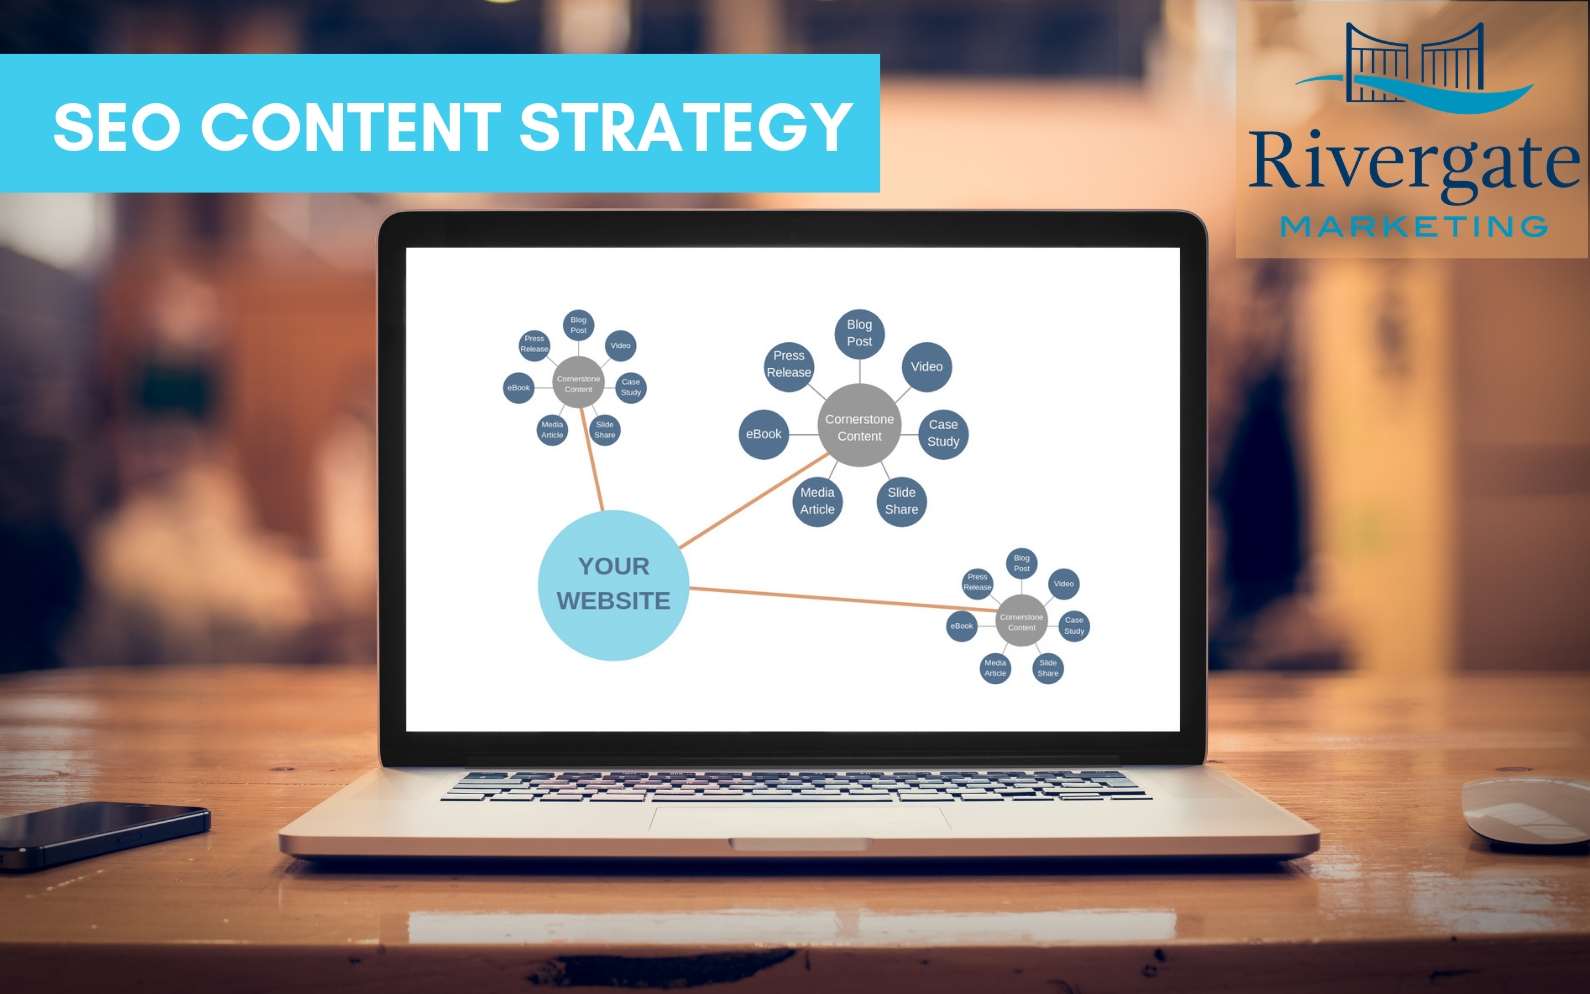 SEO cornerstone content graphic in a laptop screen with Rivergate marketing logo